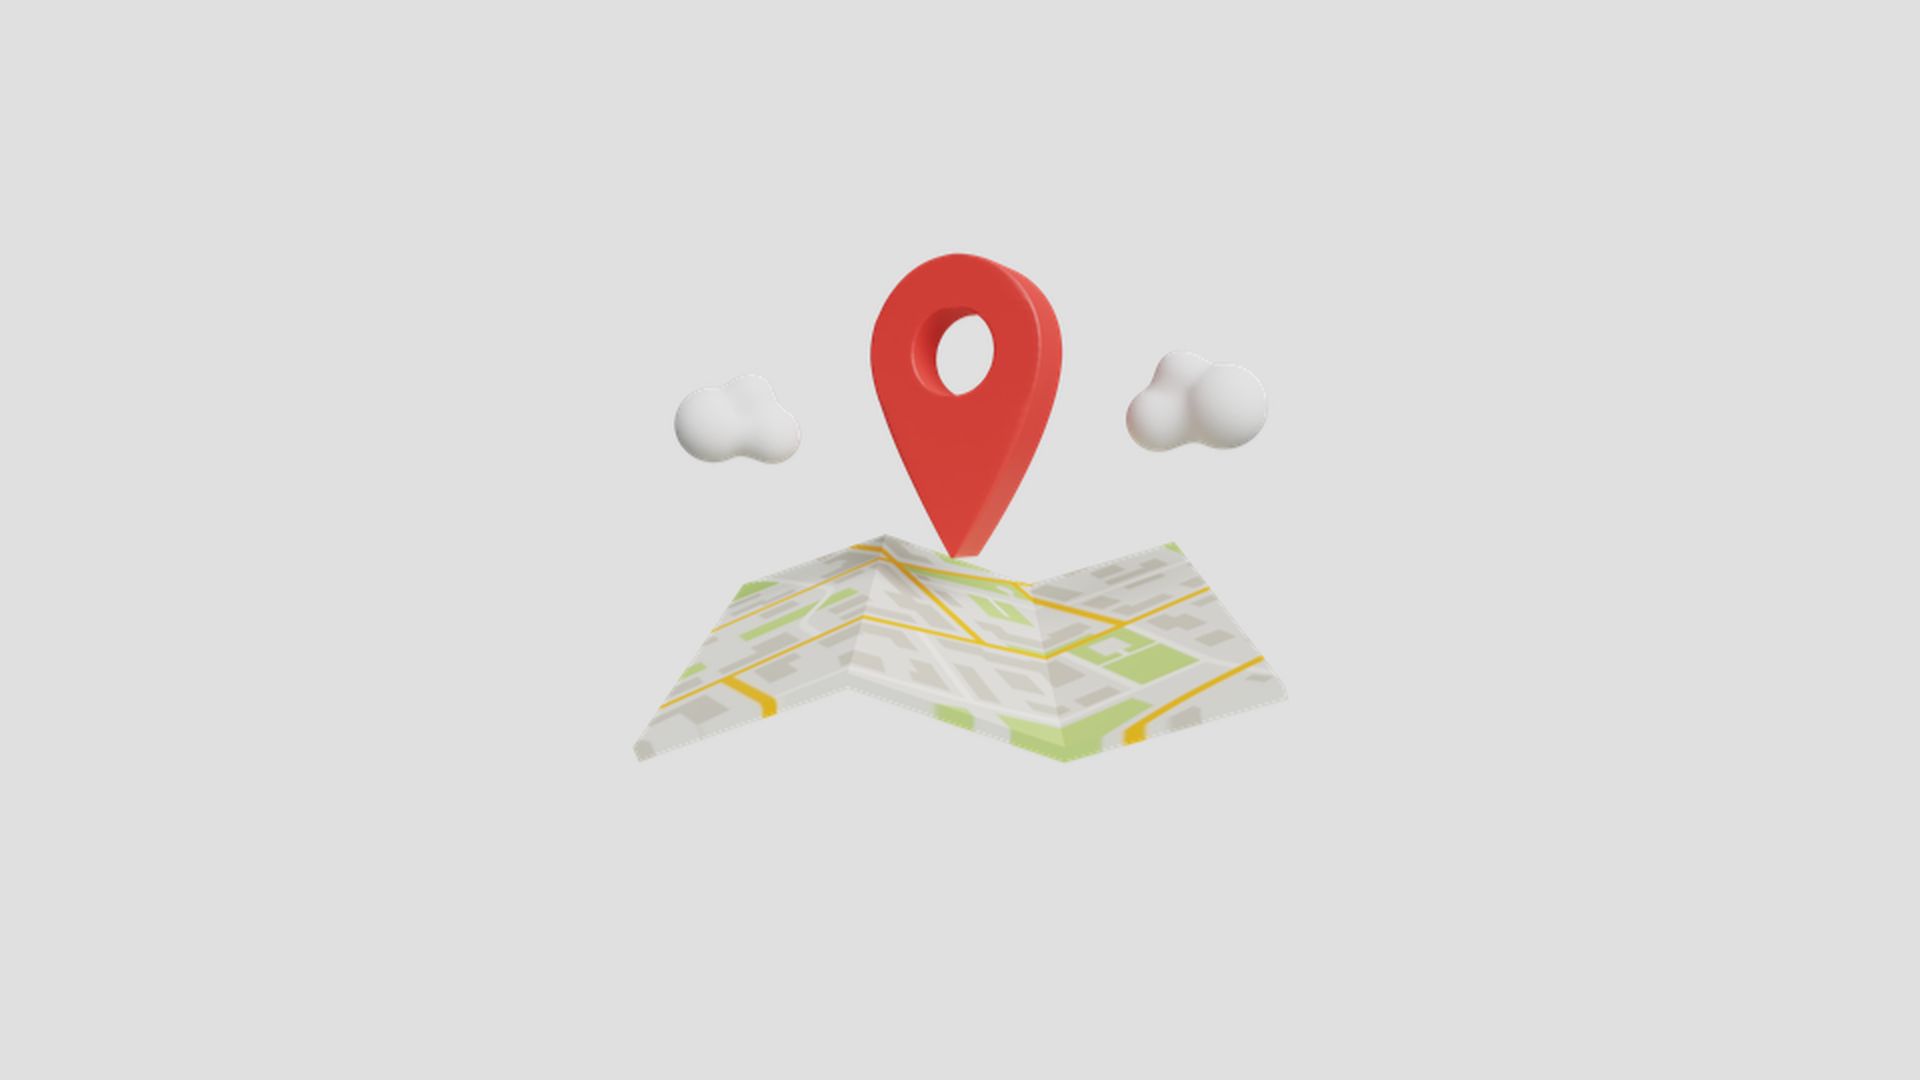 If you don't know how to geotag photos we are here to help. Let's explain what geotag means first. Then we will show you how to check if your photos are geotagged on iOS, Android and PC.